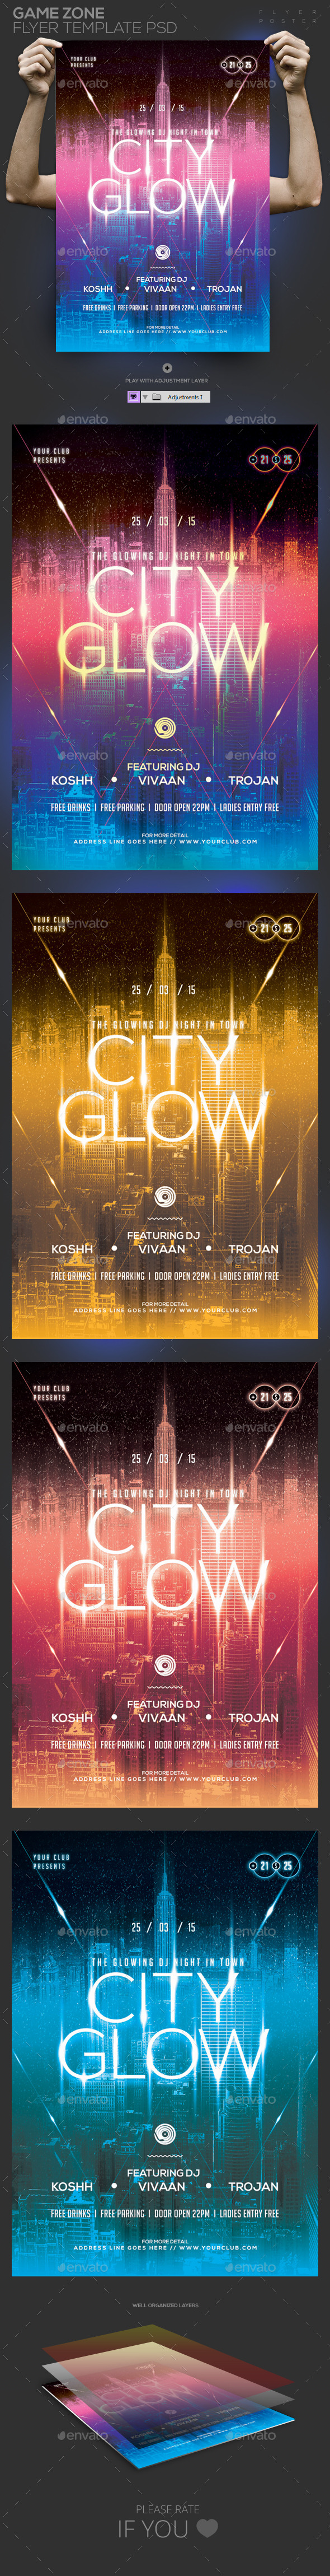 Glow City Template PSD Flyer/Poster